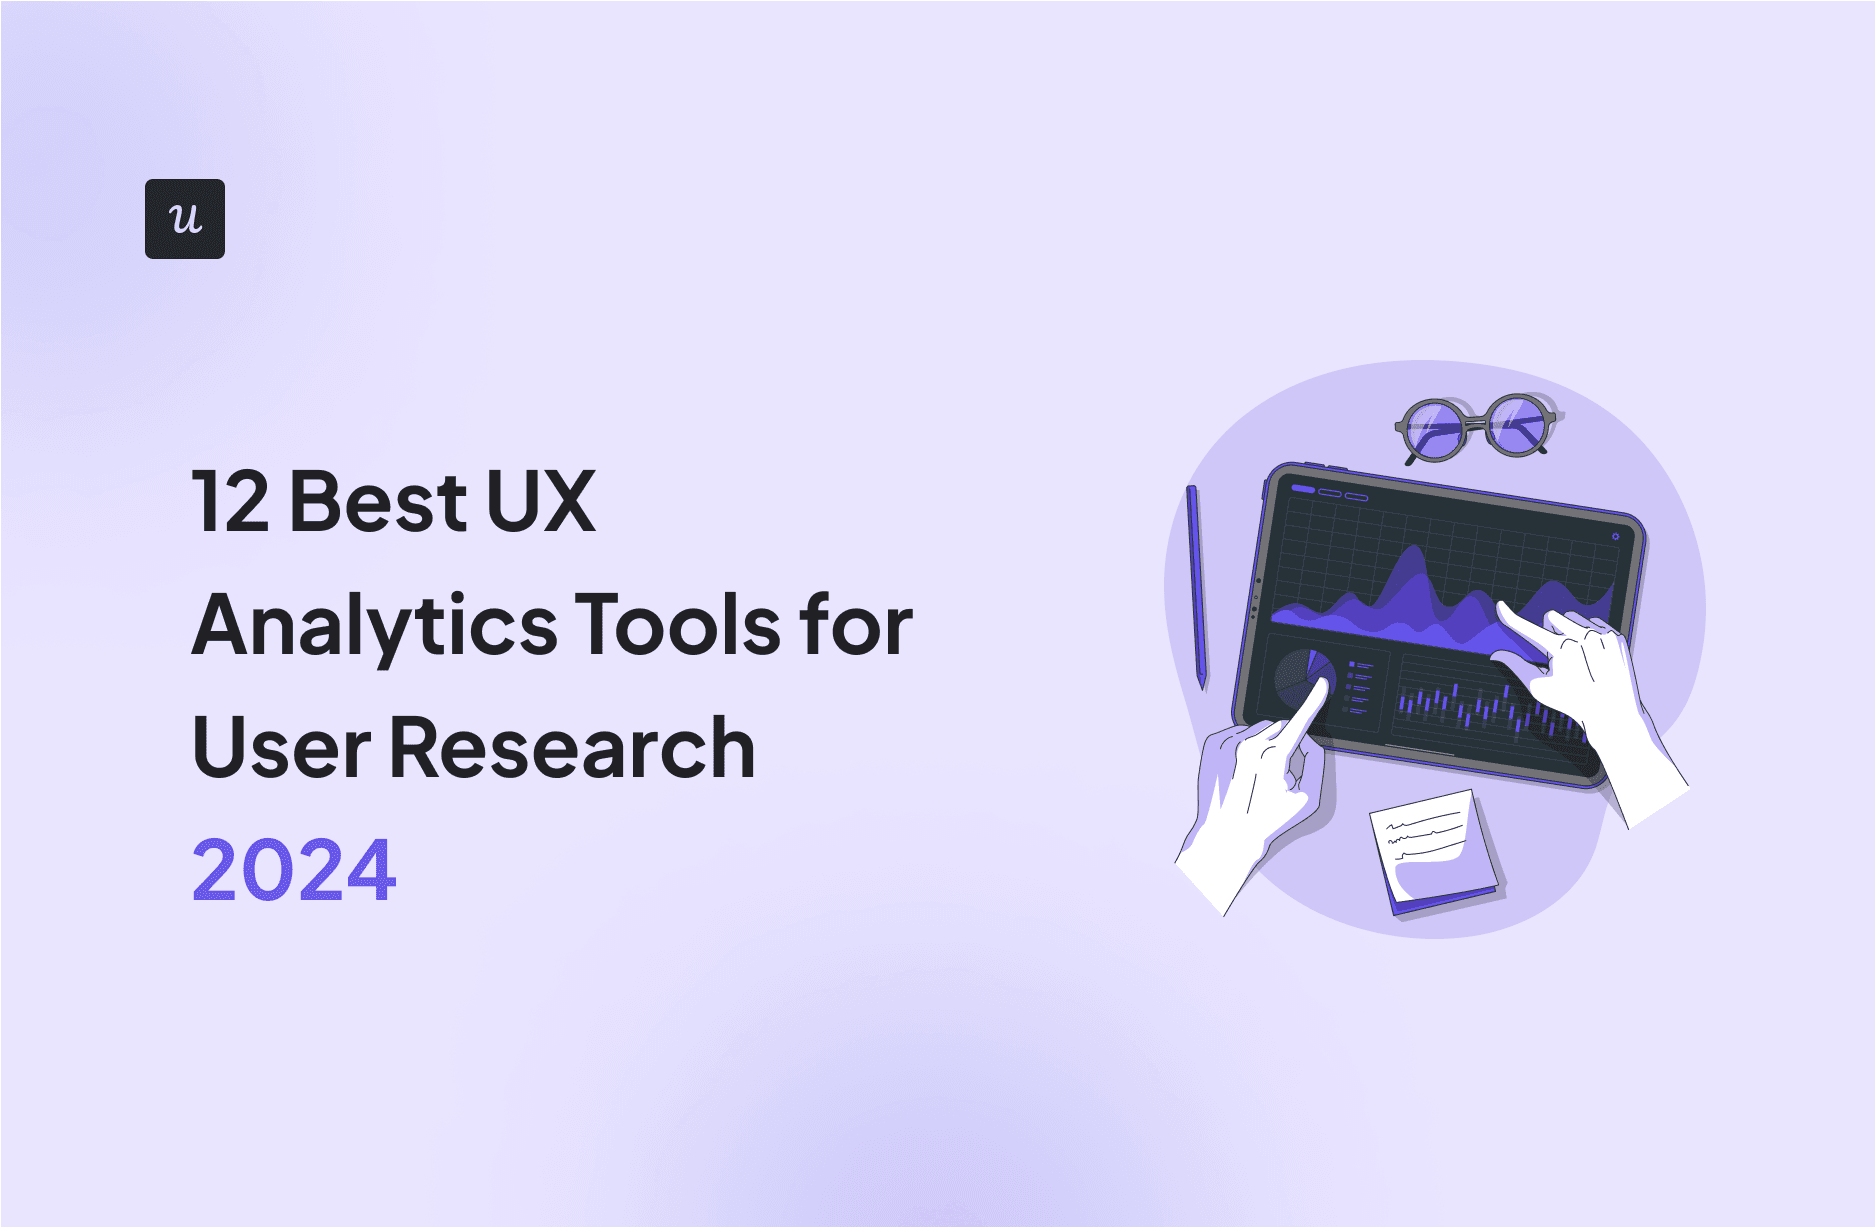 12 Best UX Analytics Tools for User Research [2024] cover